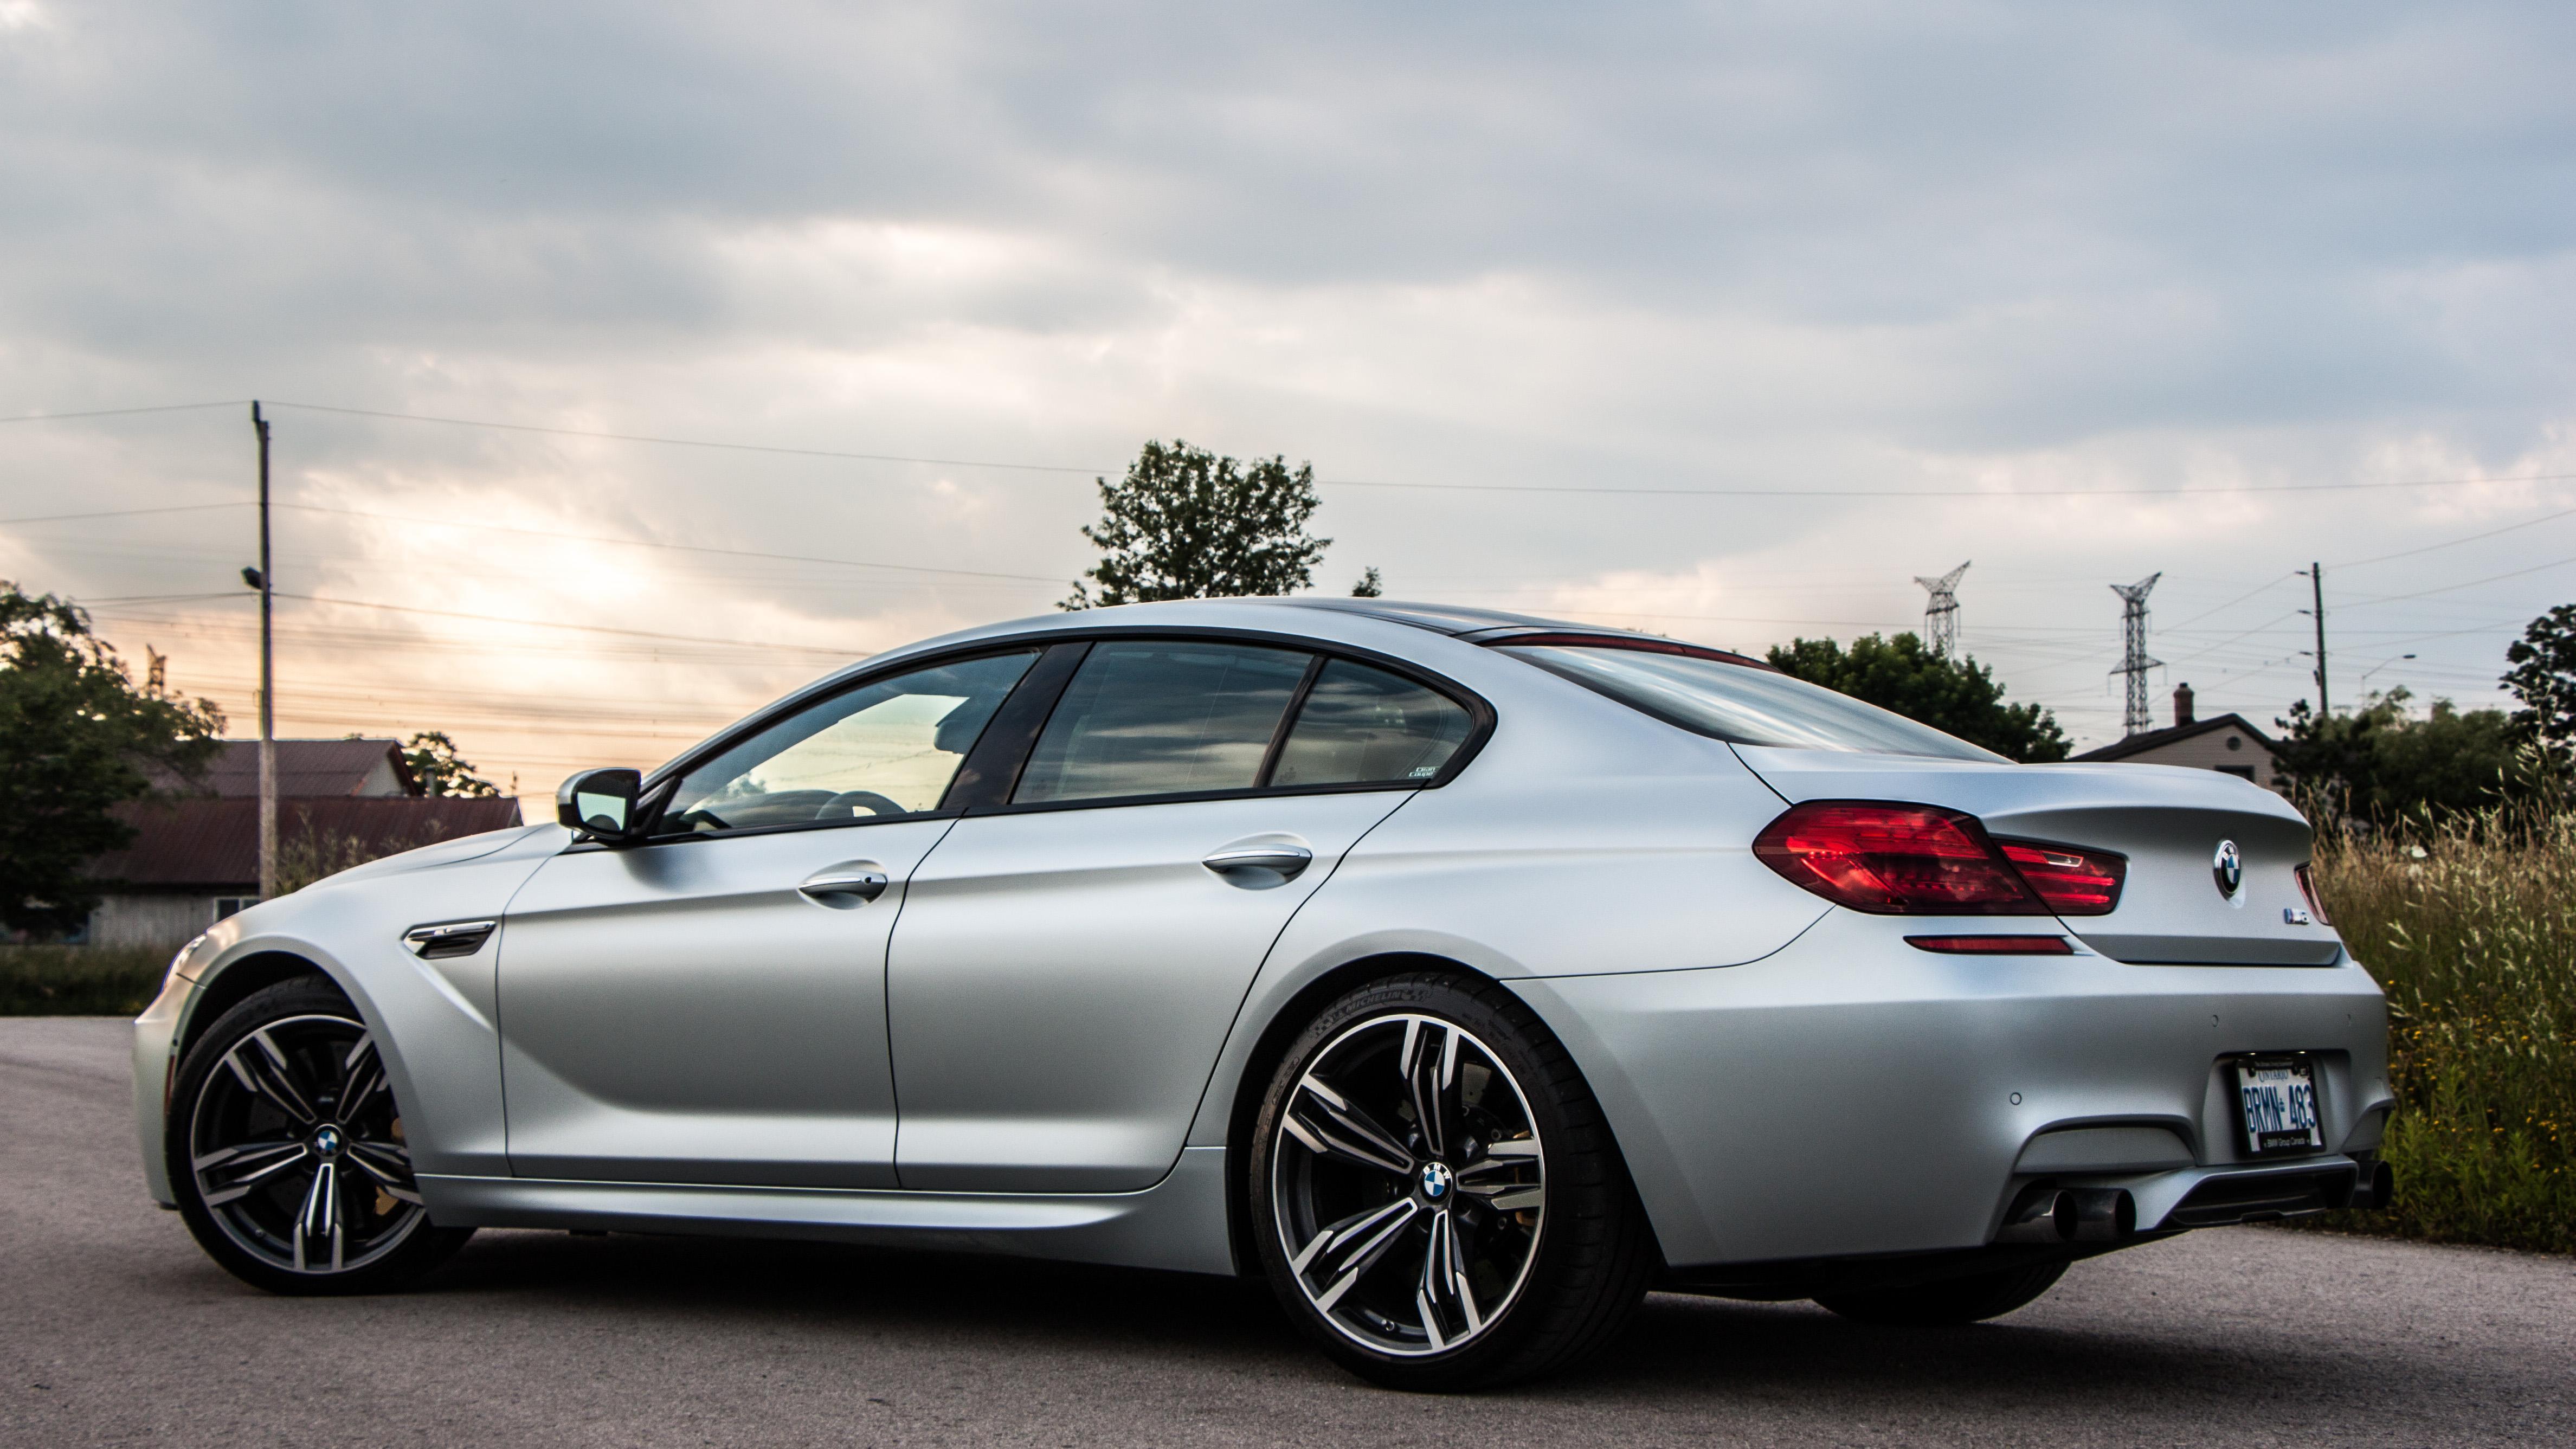 Bmw M6 wallpapers collection